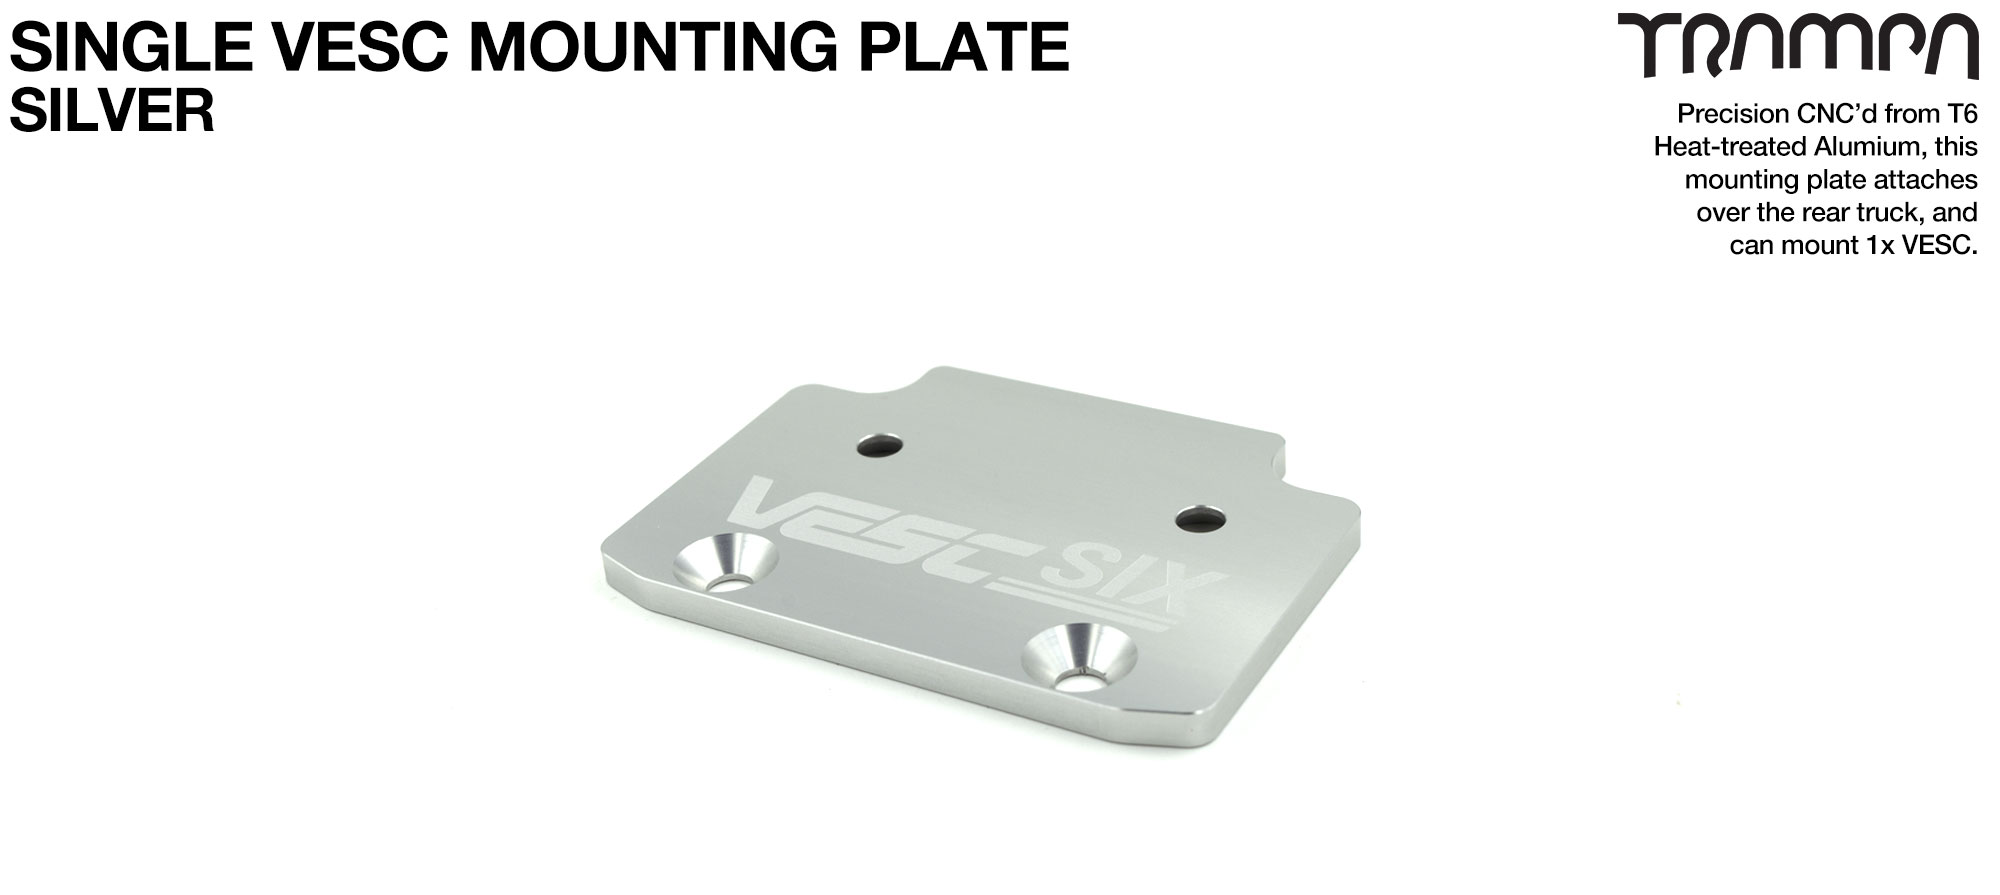 ALUMINIUM Mounting Plate for 1x VESC 6 & Fixing Bolts - SILVER 